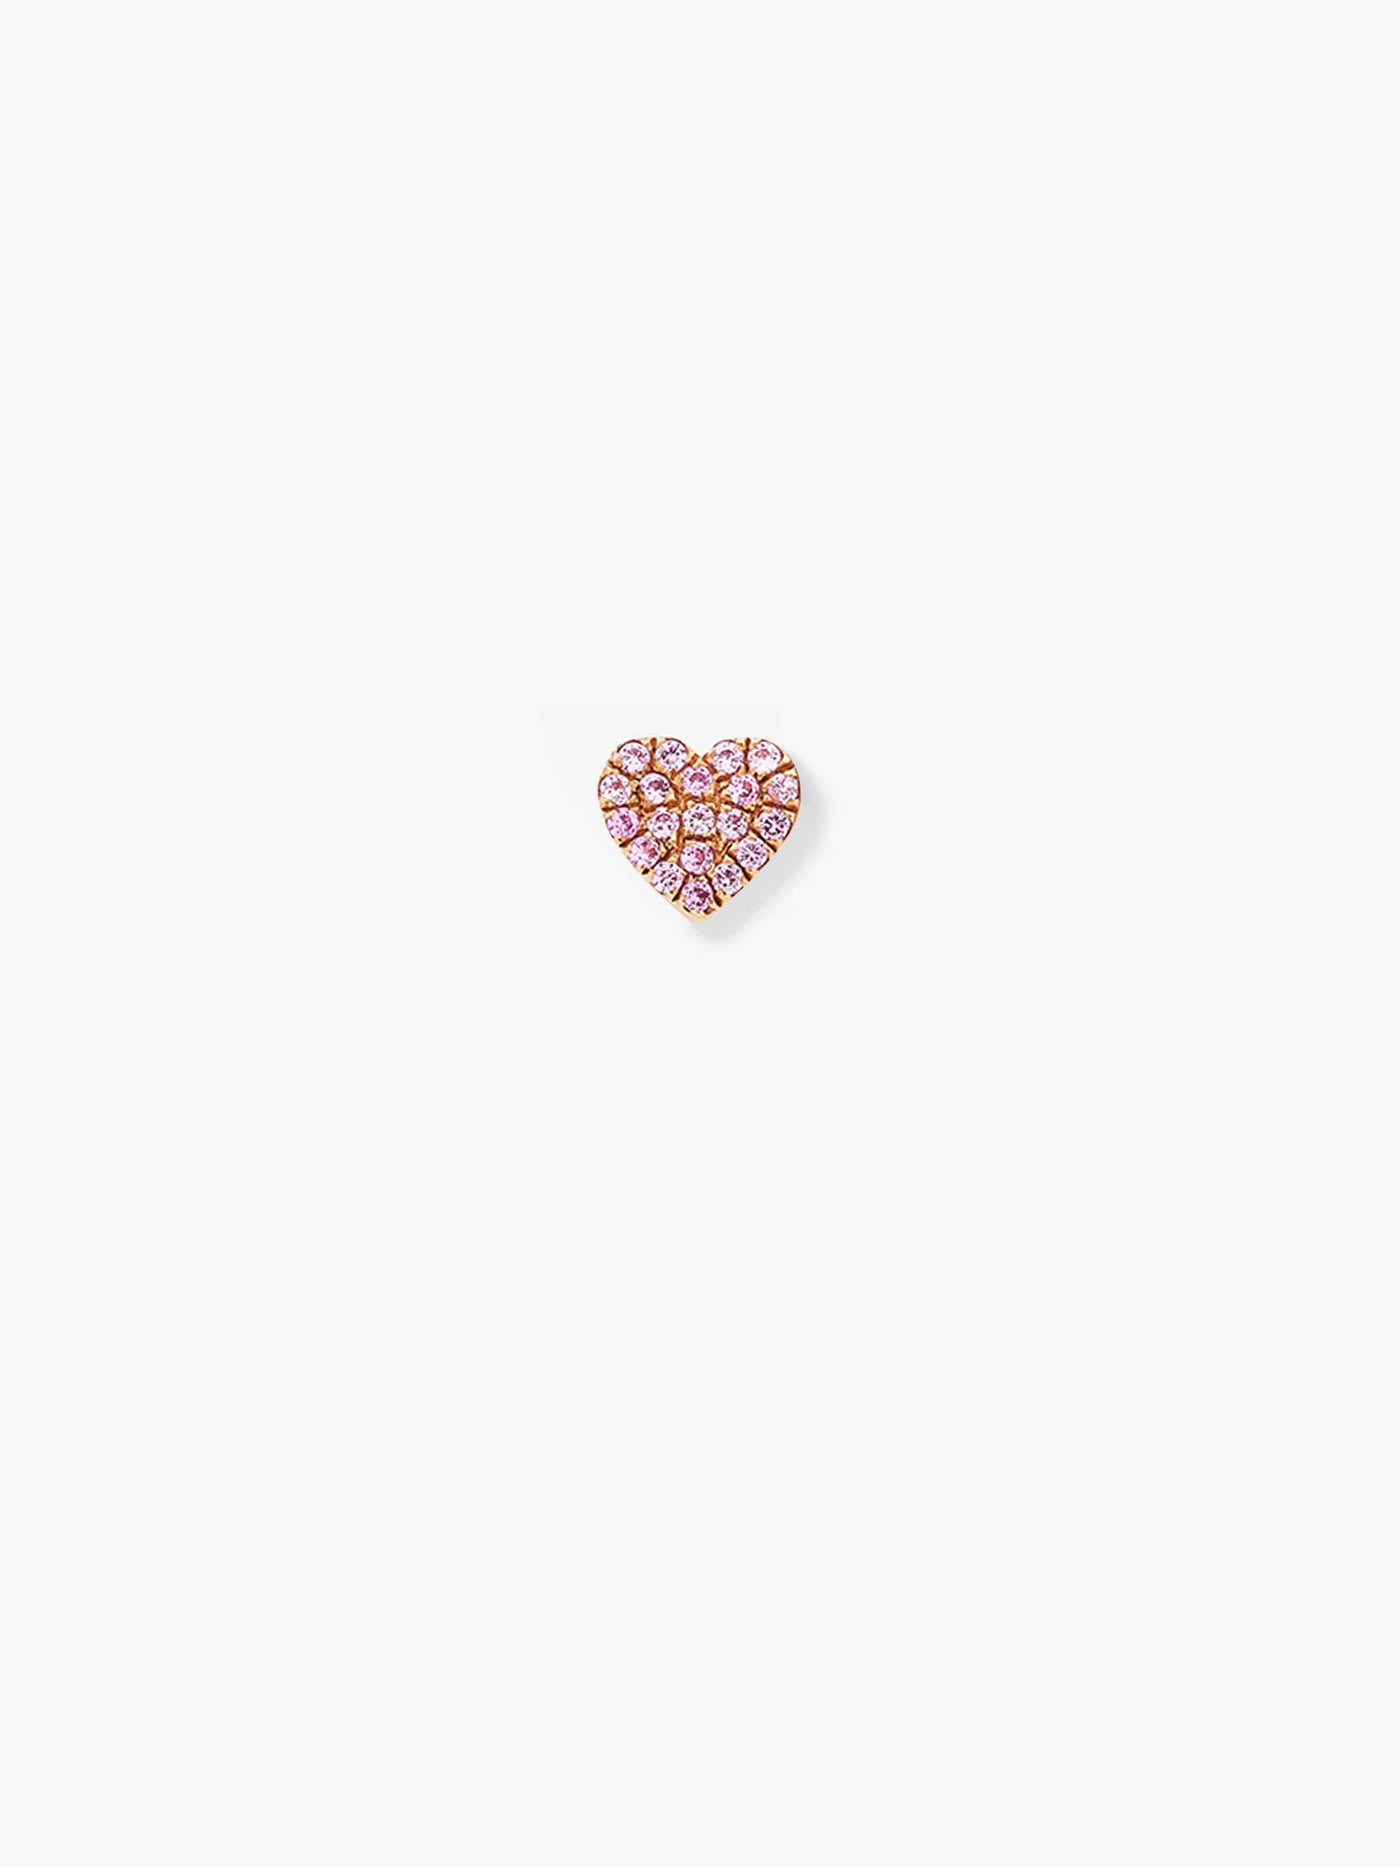 Heart in Pink Sapphire and 18k Gold